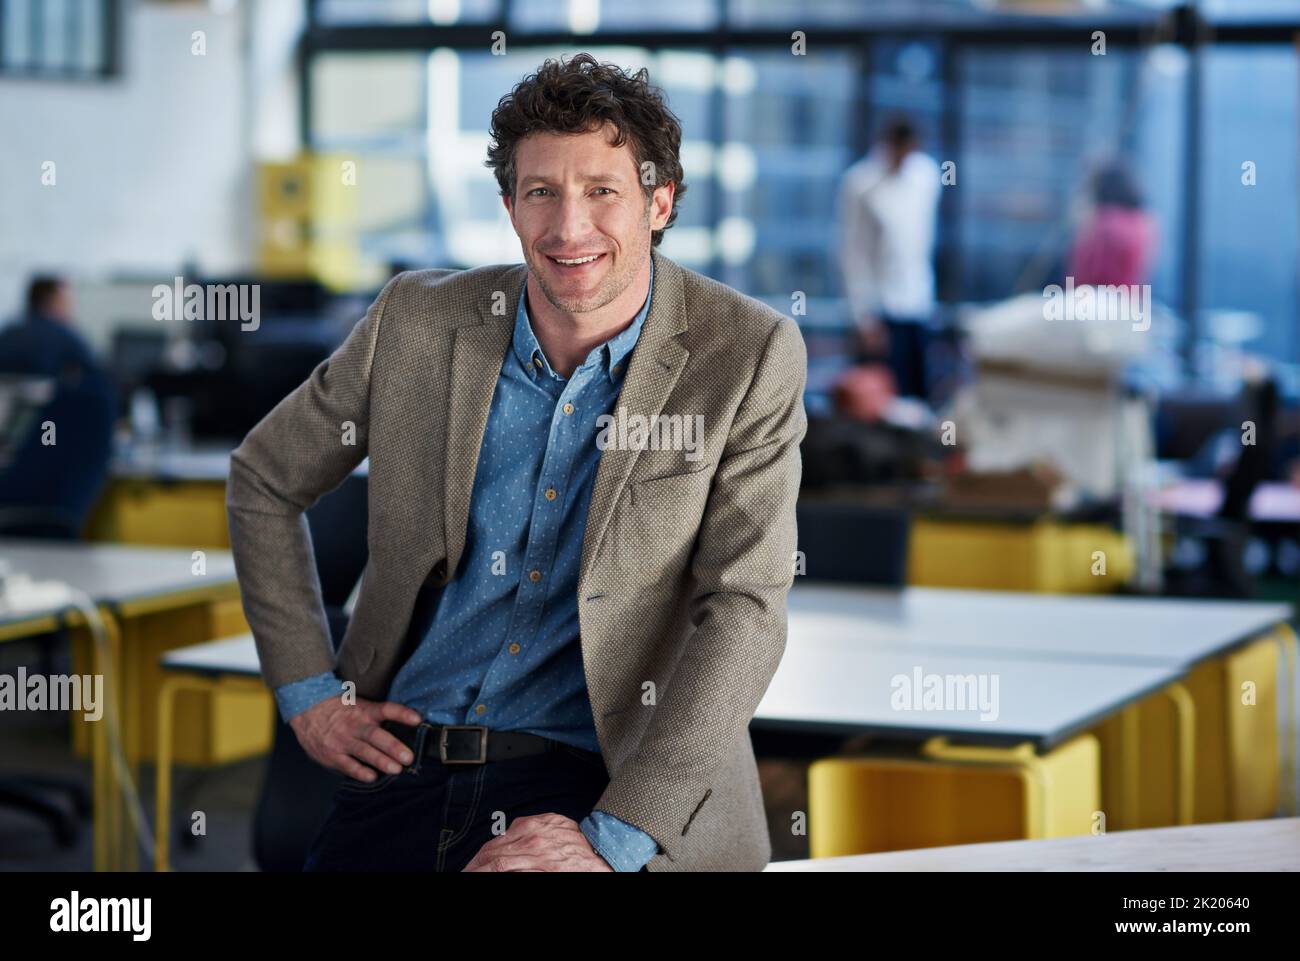 Contemporary corporate strategies. Candid image of a mature man sitting confidently in an open plan office space. Stock Photo